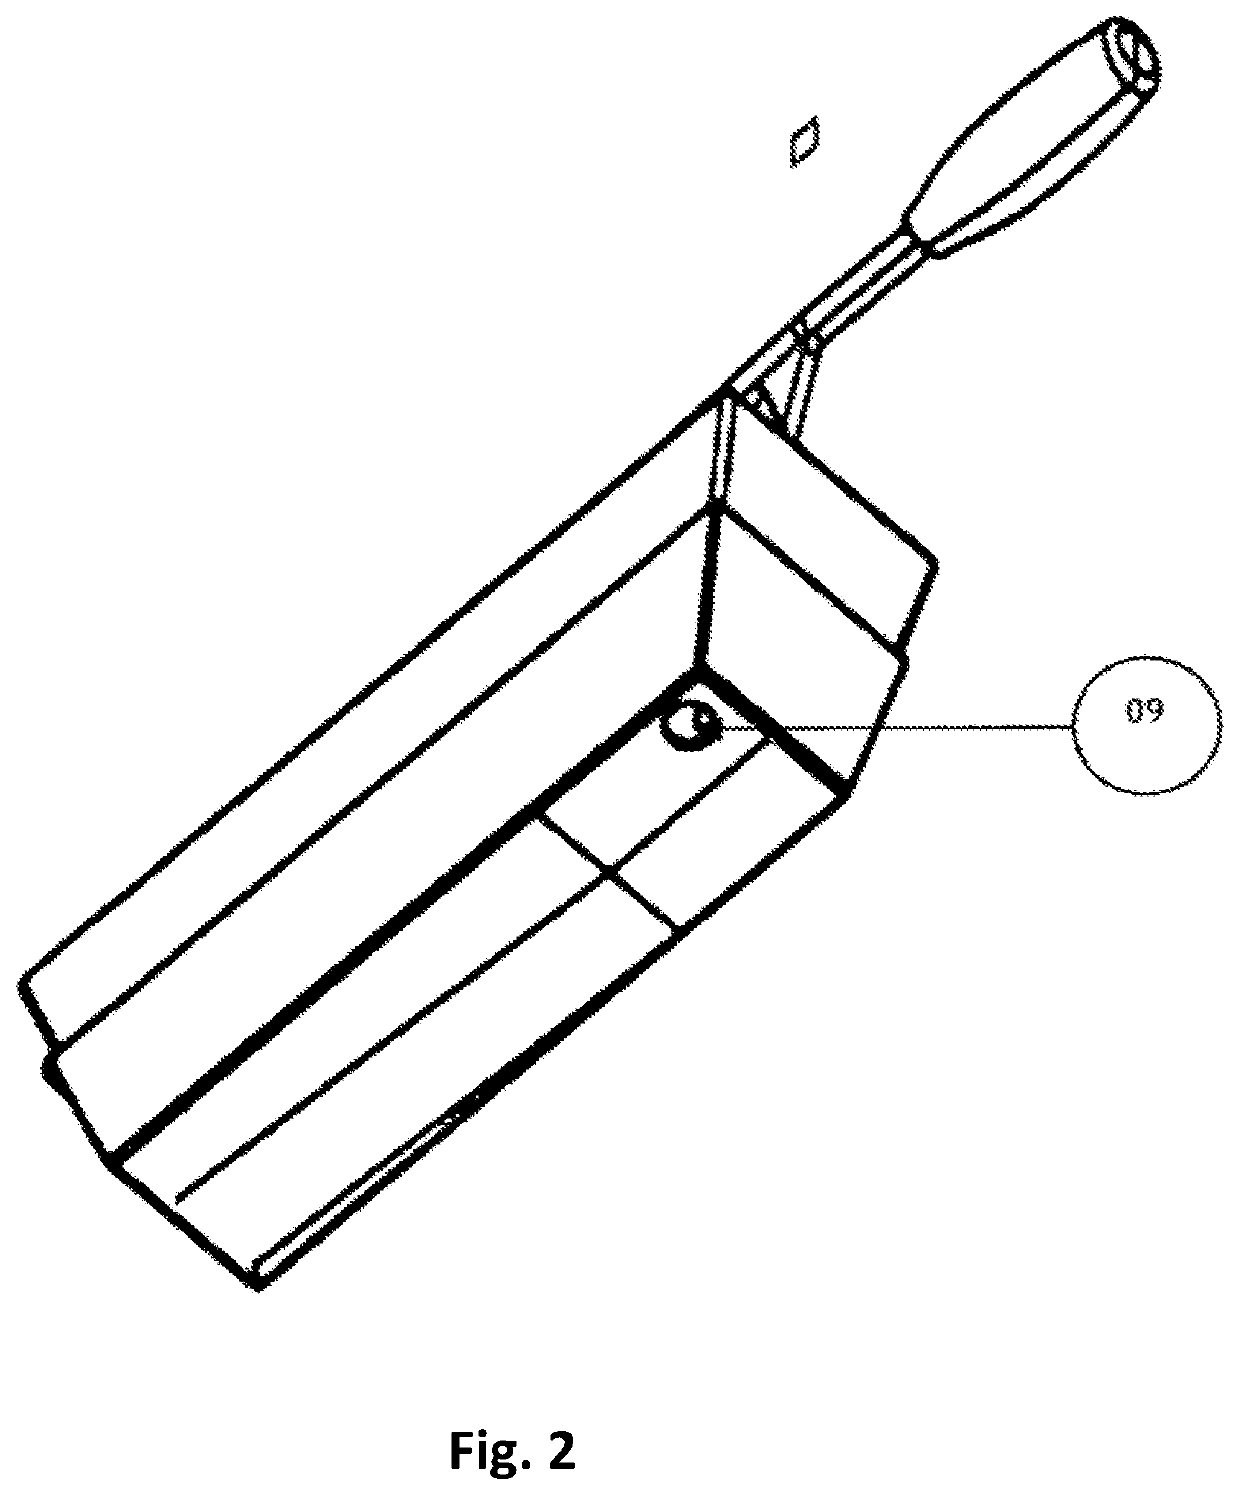 Hand-held apparatus for extracting contents of sachet/pouch